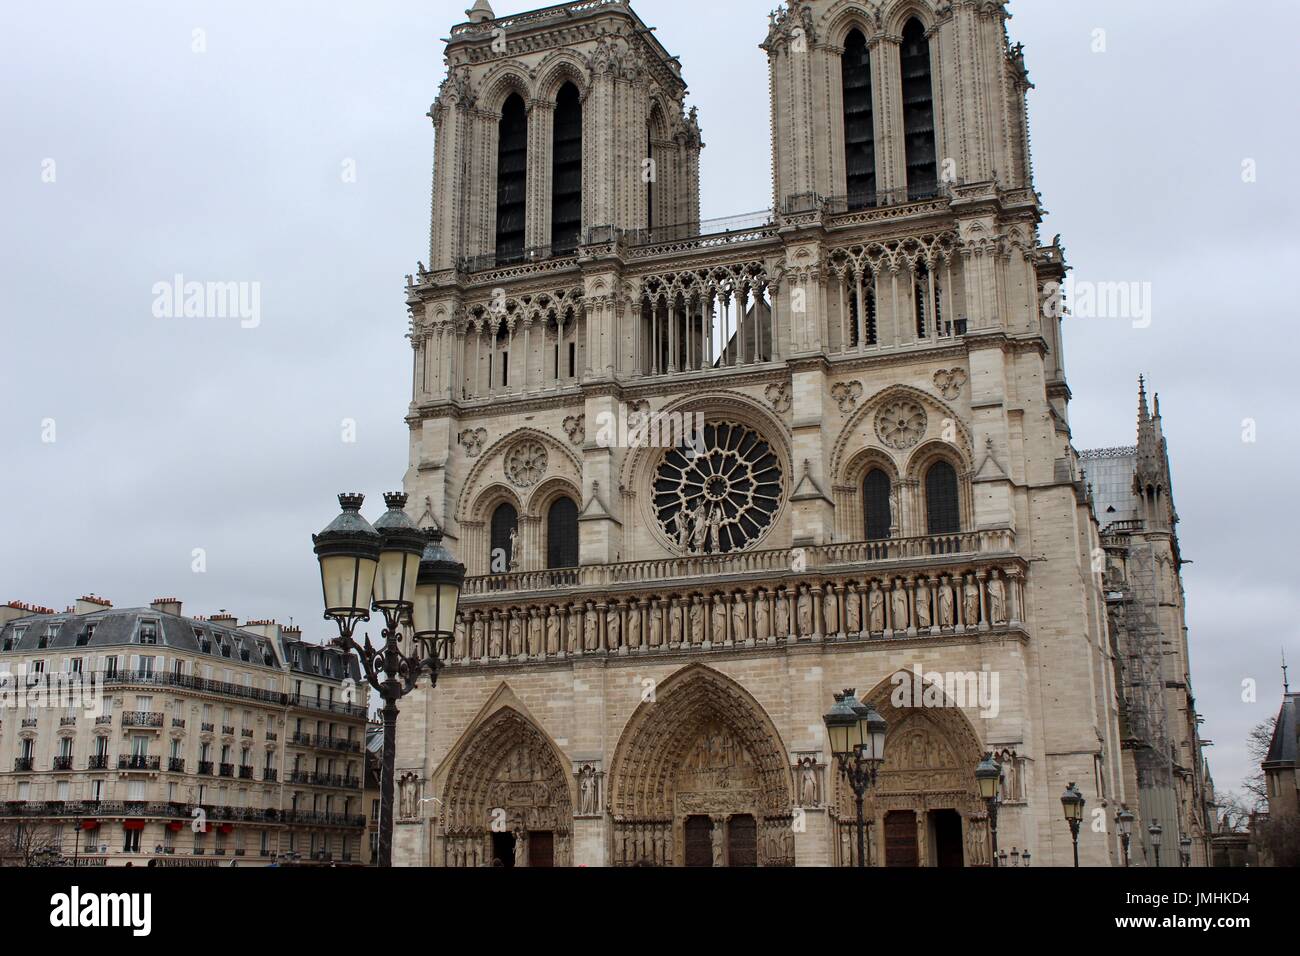 notre dame cathedral, paris france Stock Photo